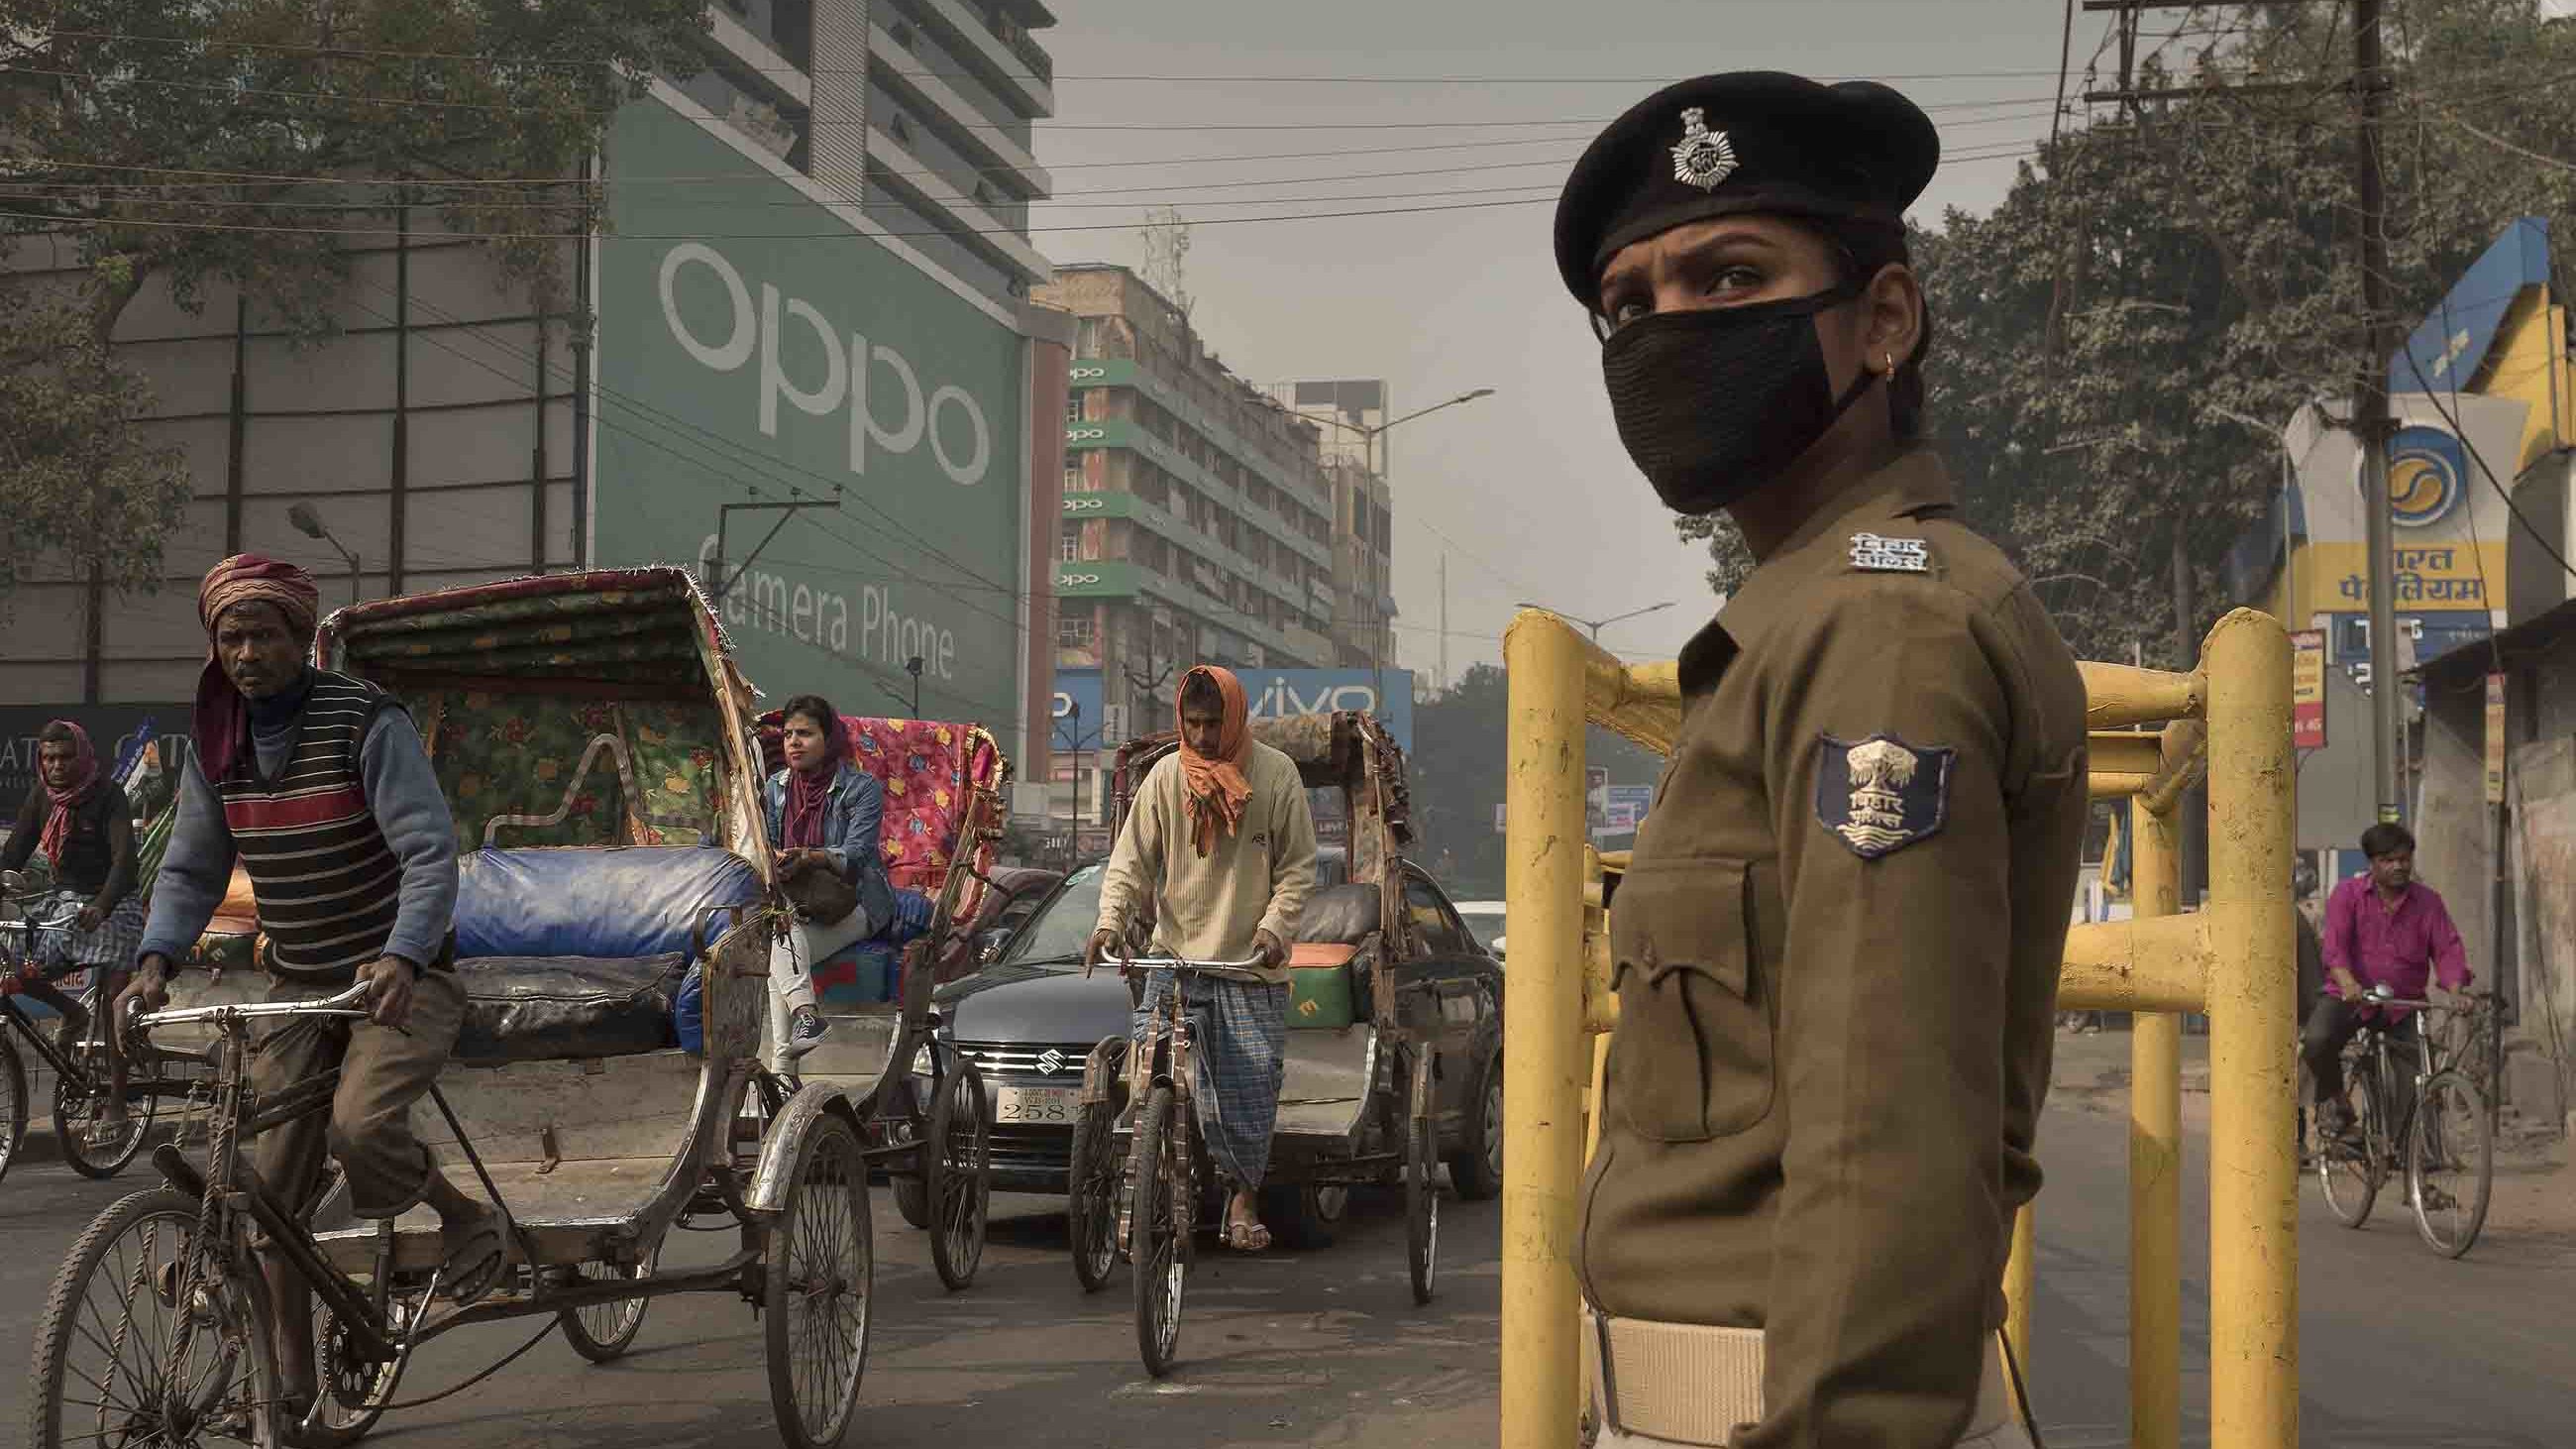 Traffic policewoman Sandhya Bhartj directs traffic in central Patna. Her  cloth mask does little to protect her from the smallest particulate pollution.